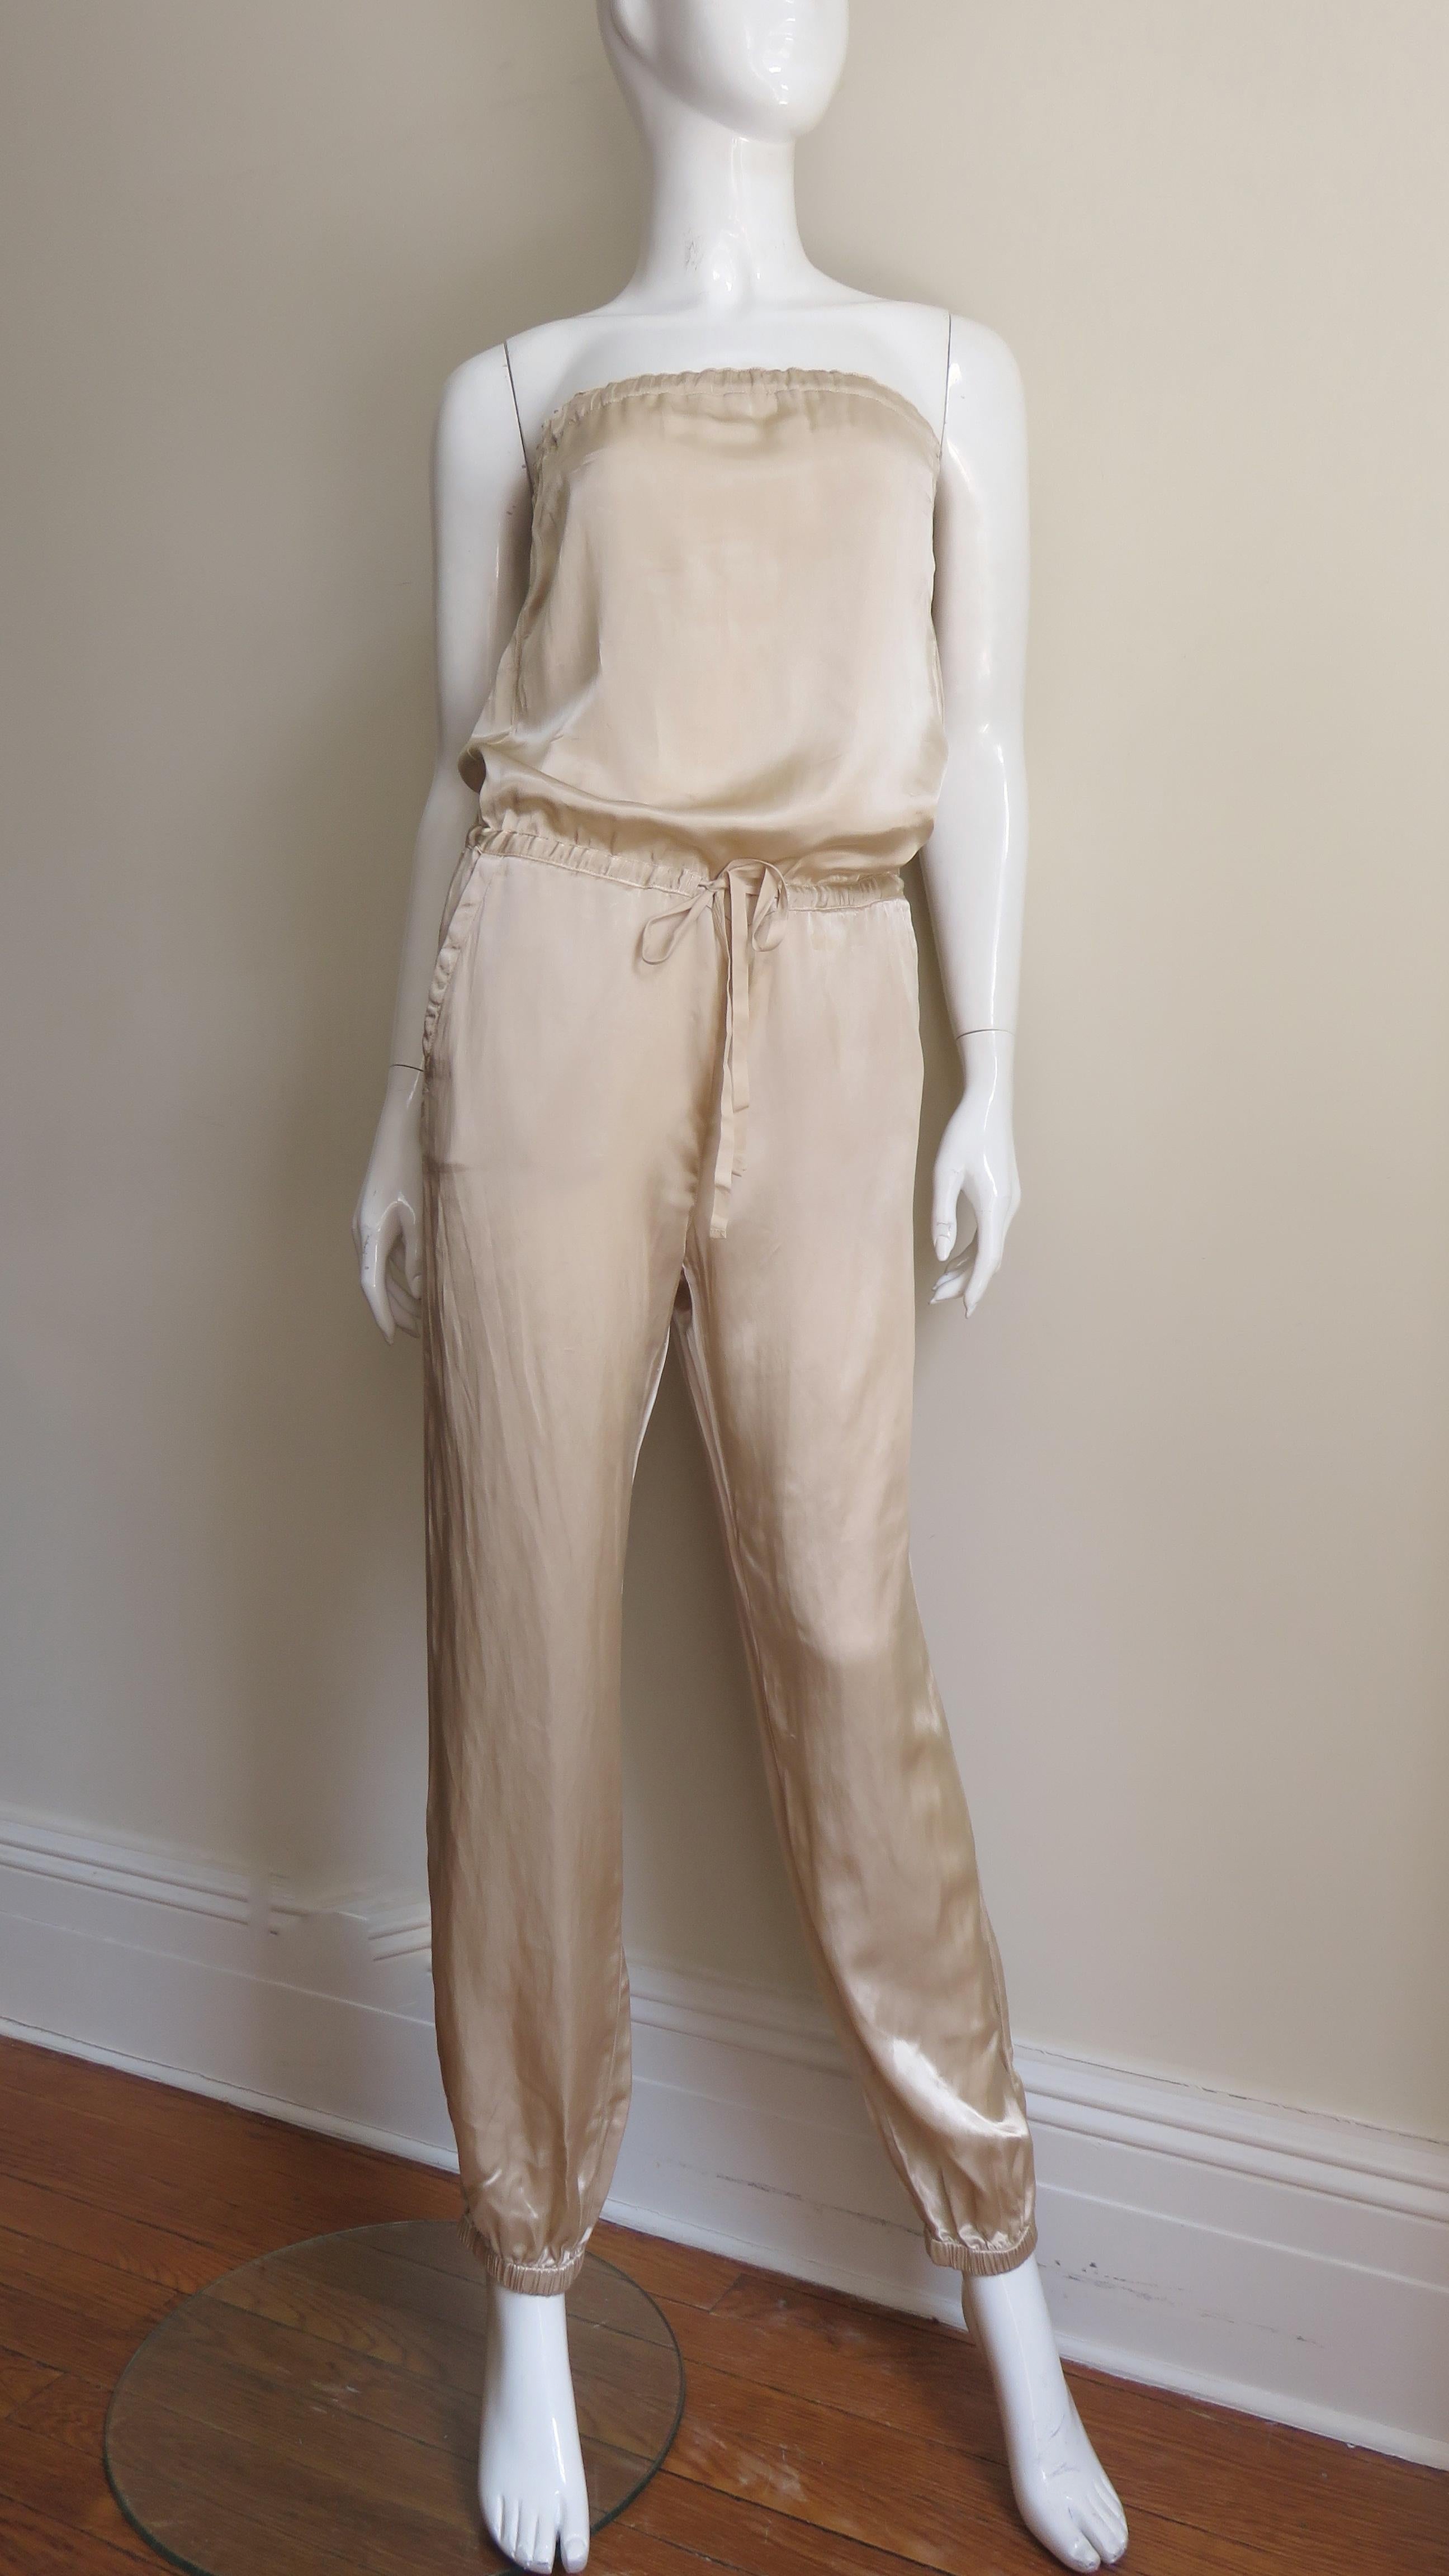 A fabulous soft gold colored silk jumpsuit by Martin Margiela.  It is strapless with elastic at the top.  The bodice is blouson tying with a drawstring at the dropped waist.  The pants gather with stretch at the ankles.  There are 2 hip side seam